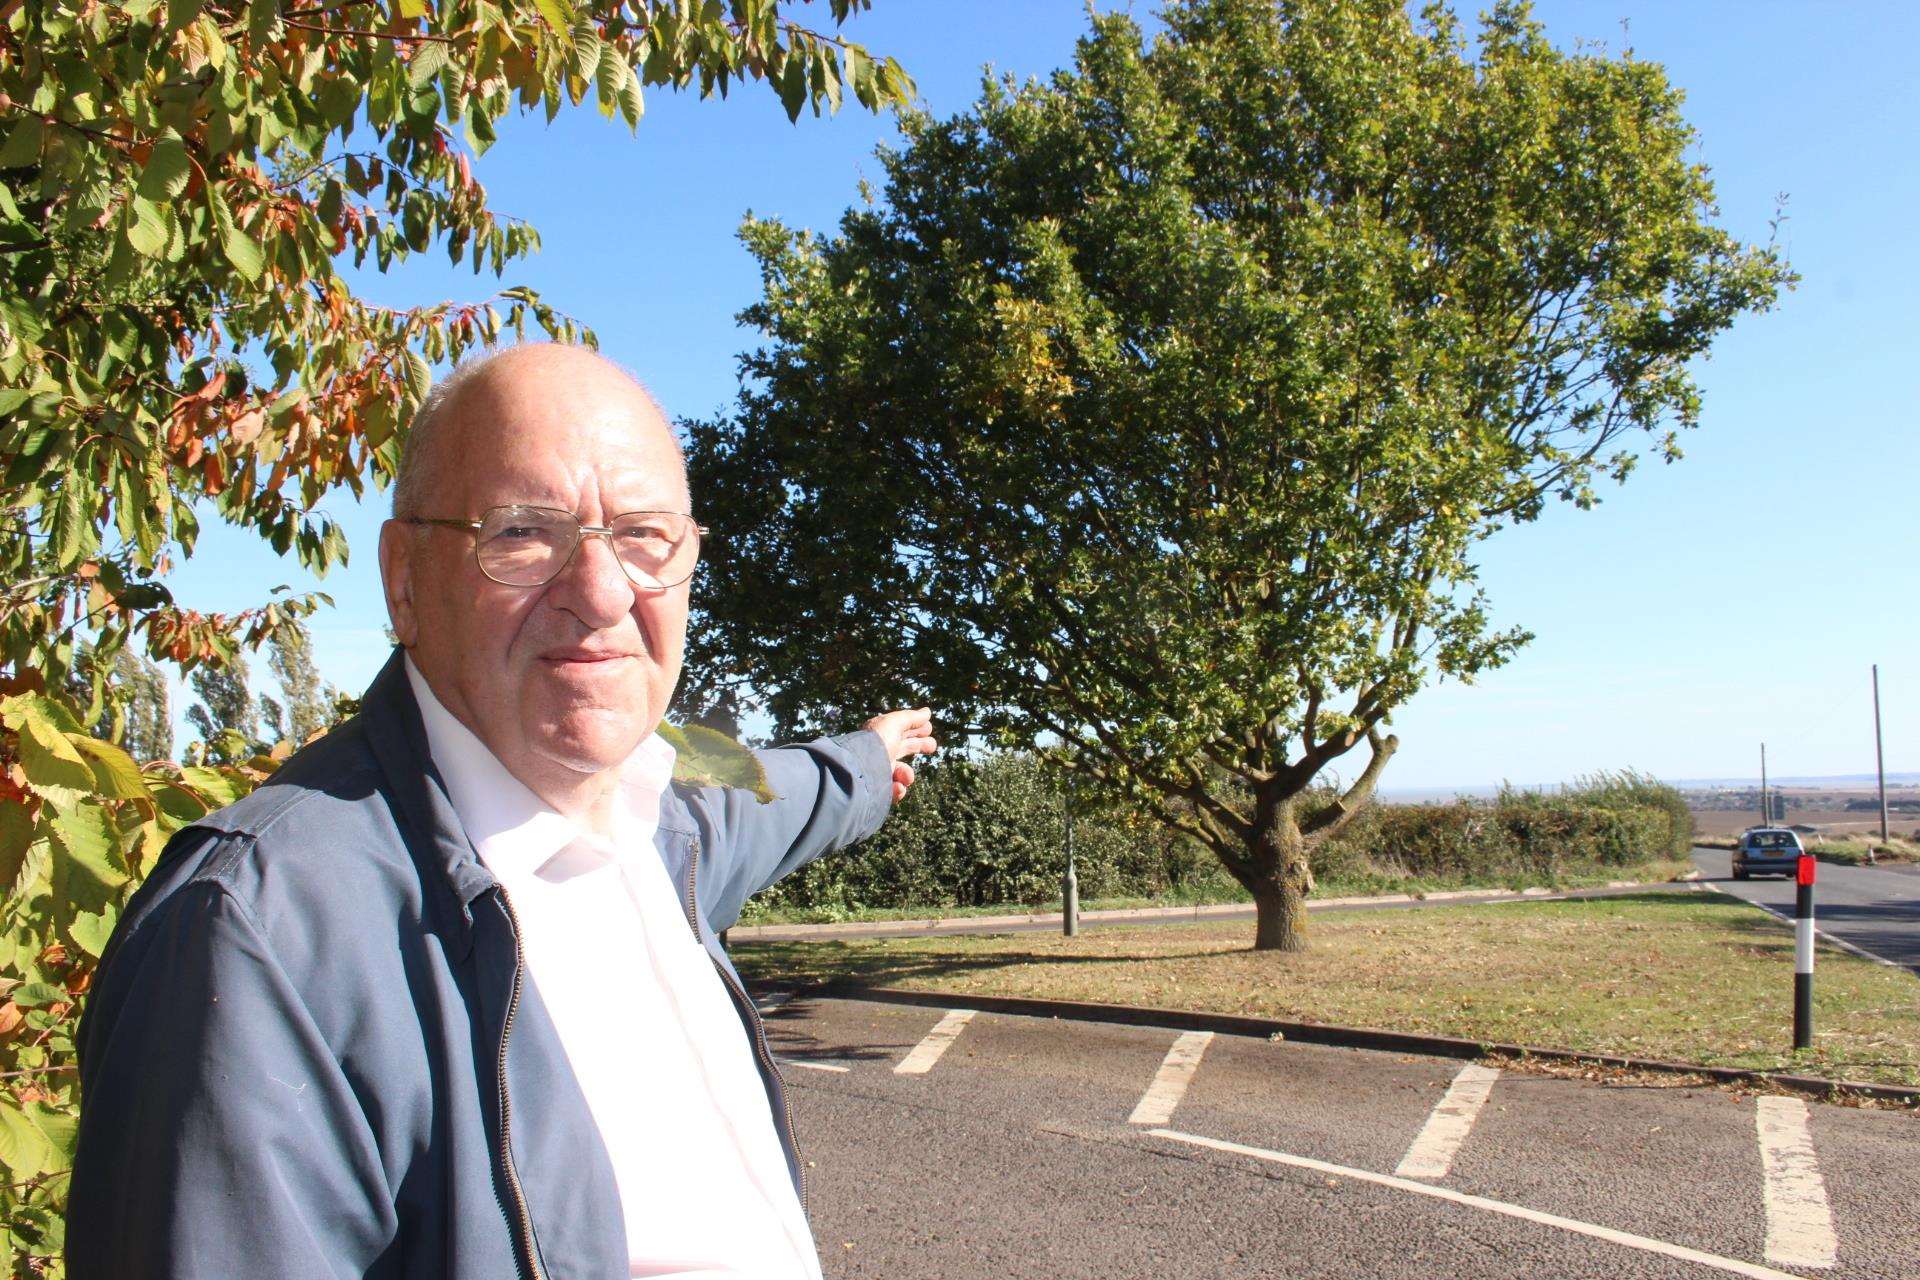 Mike Brown points to the lopsided oak tree at Eastchurch (4748335)